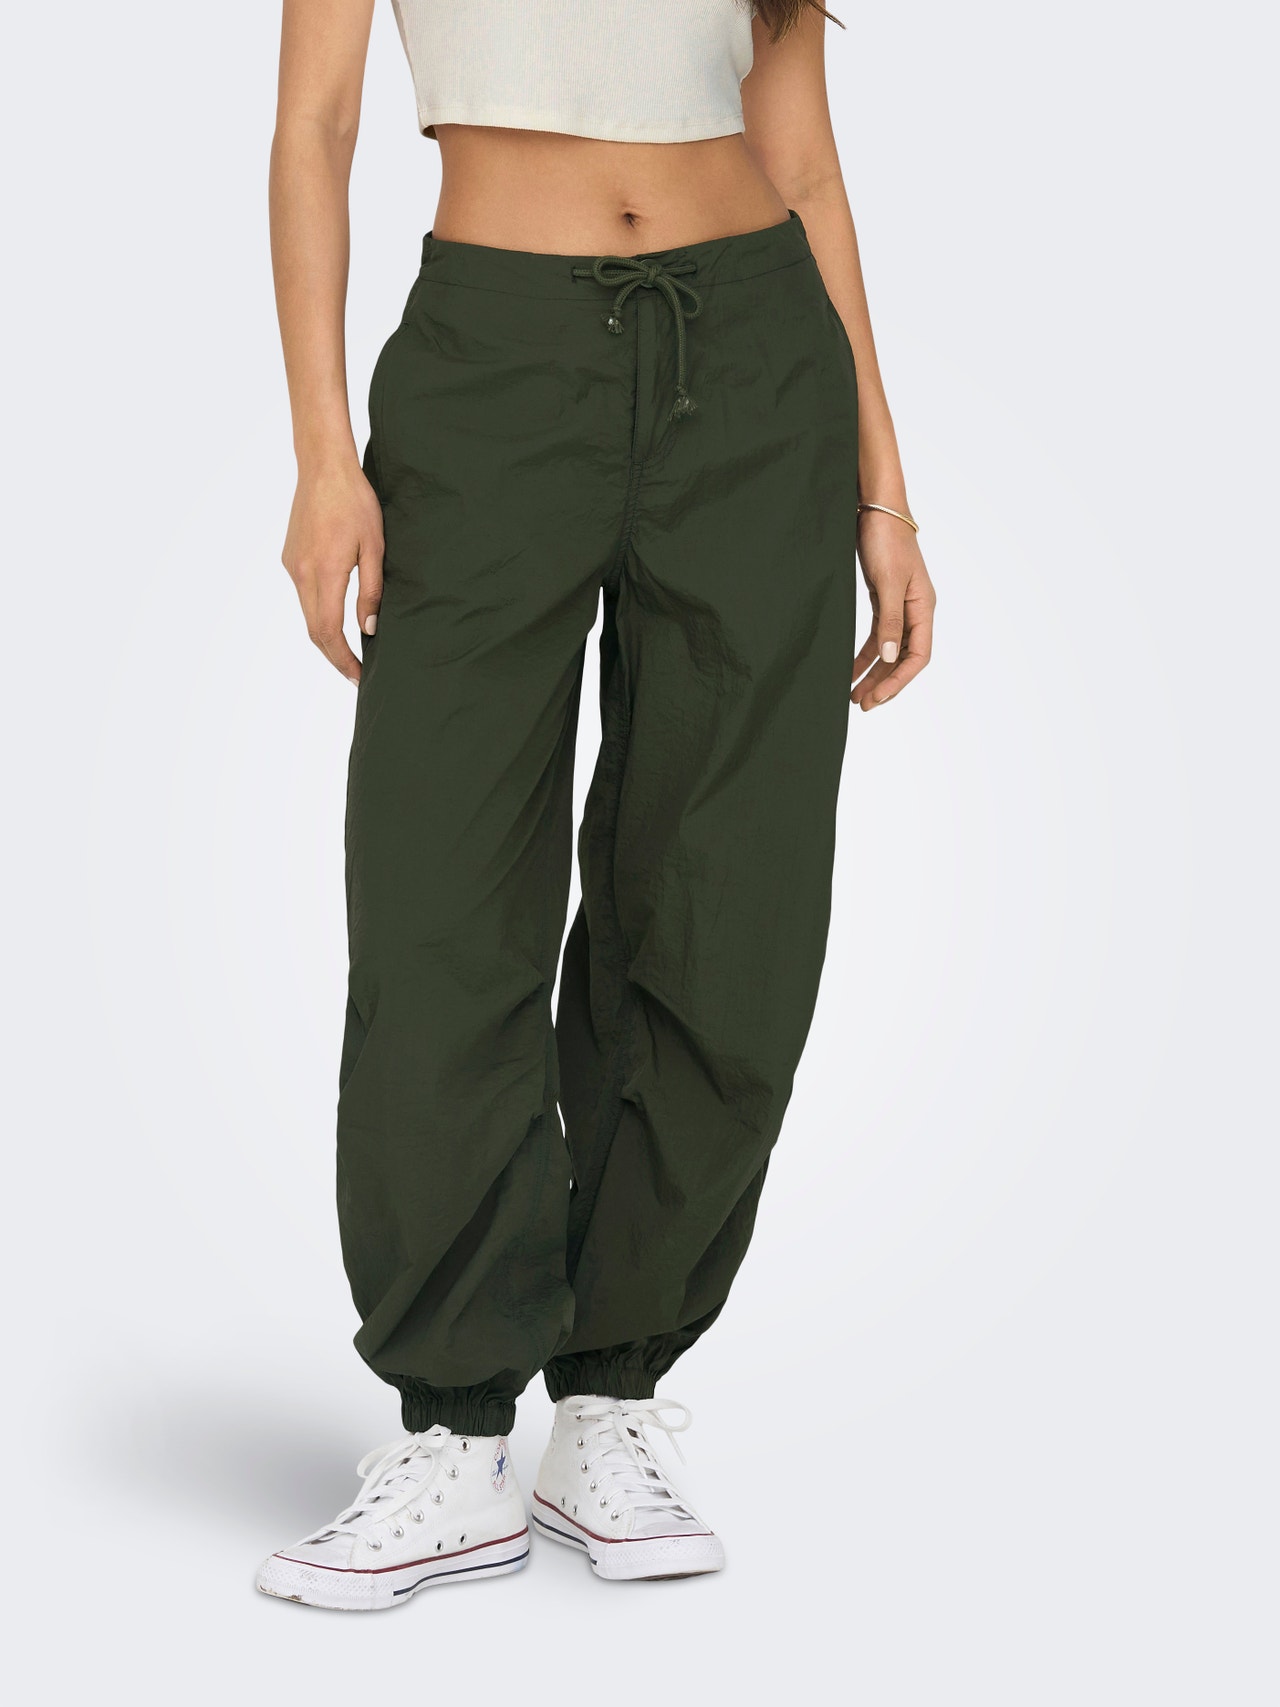 https://images.only.com/15295049/4234052/003/only-loosefitpants-green.jpg?v=823bee3025fe6acf1a9bbabfbb3cacde&format=webp&width=1280&quality=90&key=25-0-3